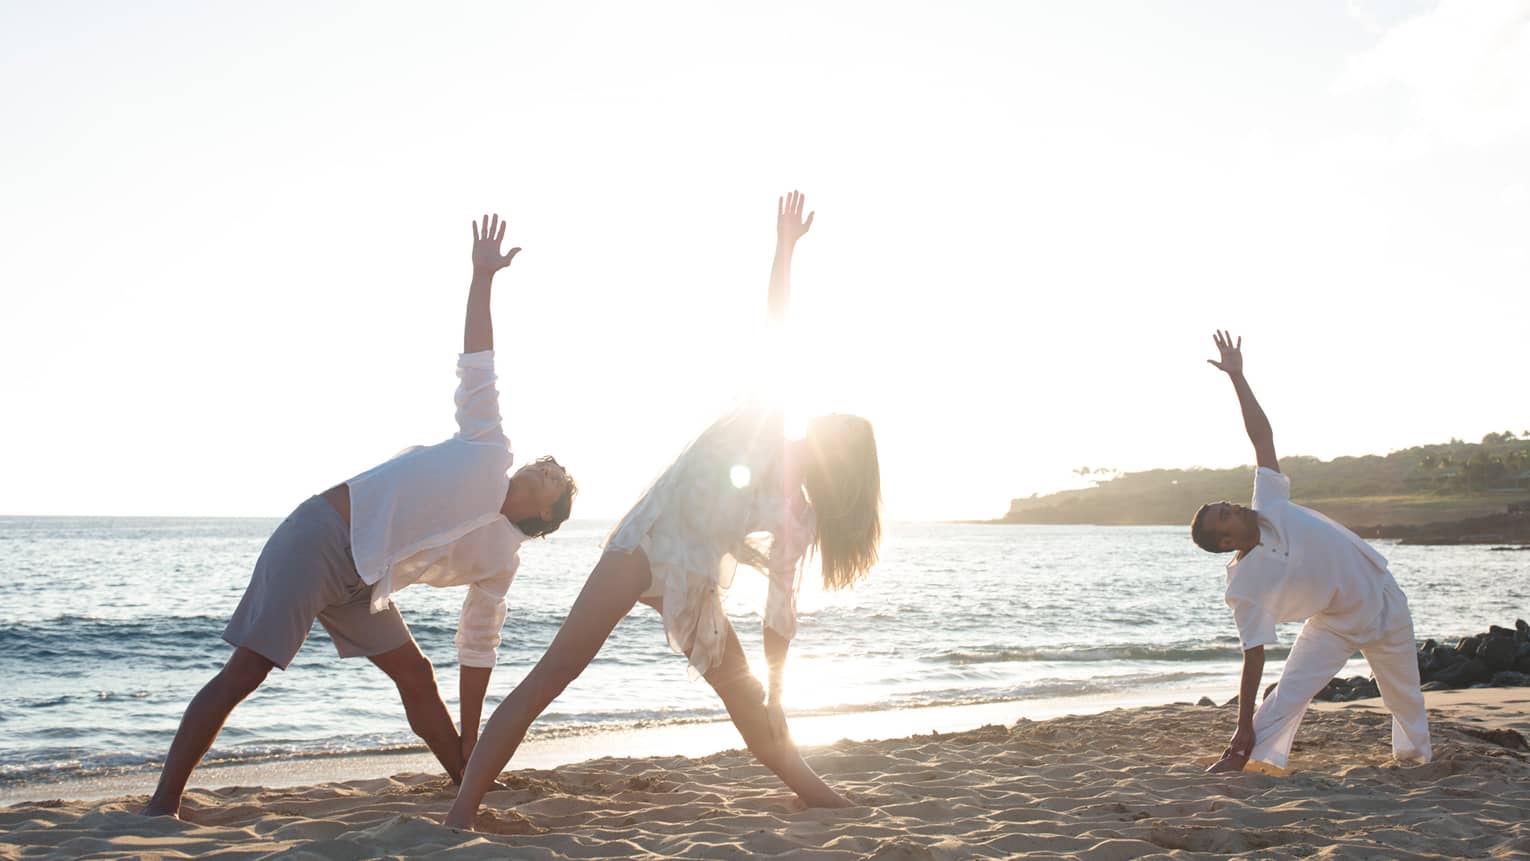 Three people stretch in yoga pose on sand beach at sunrise